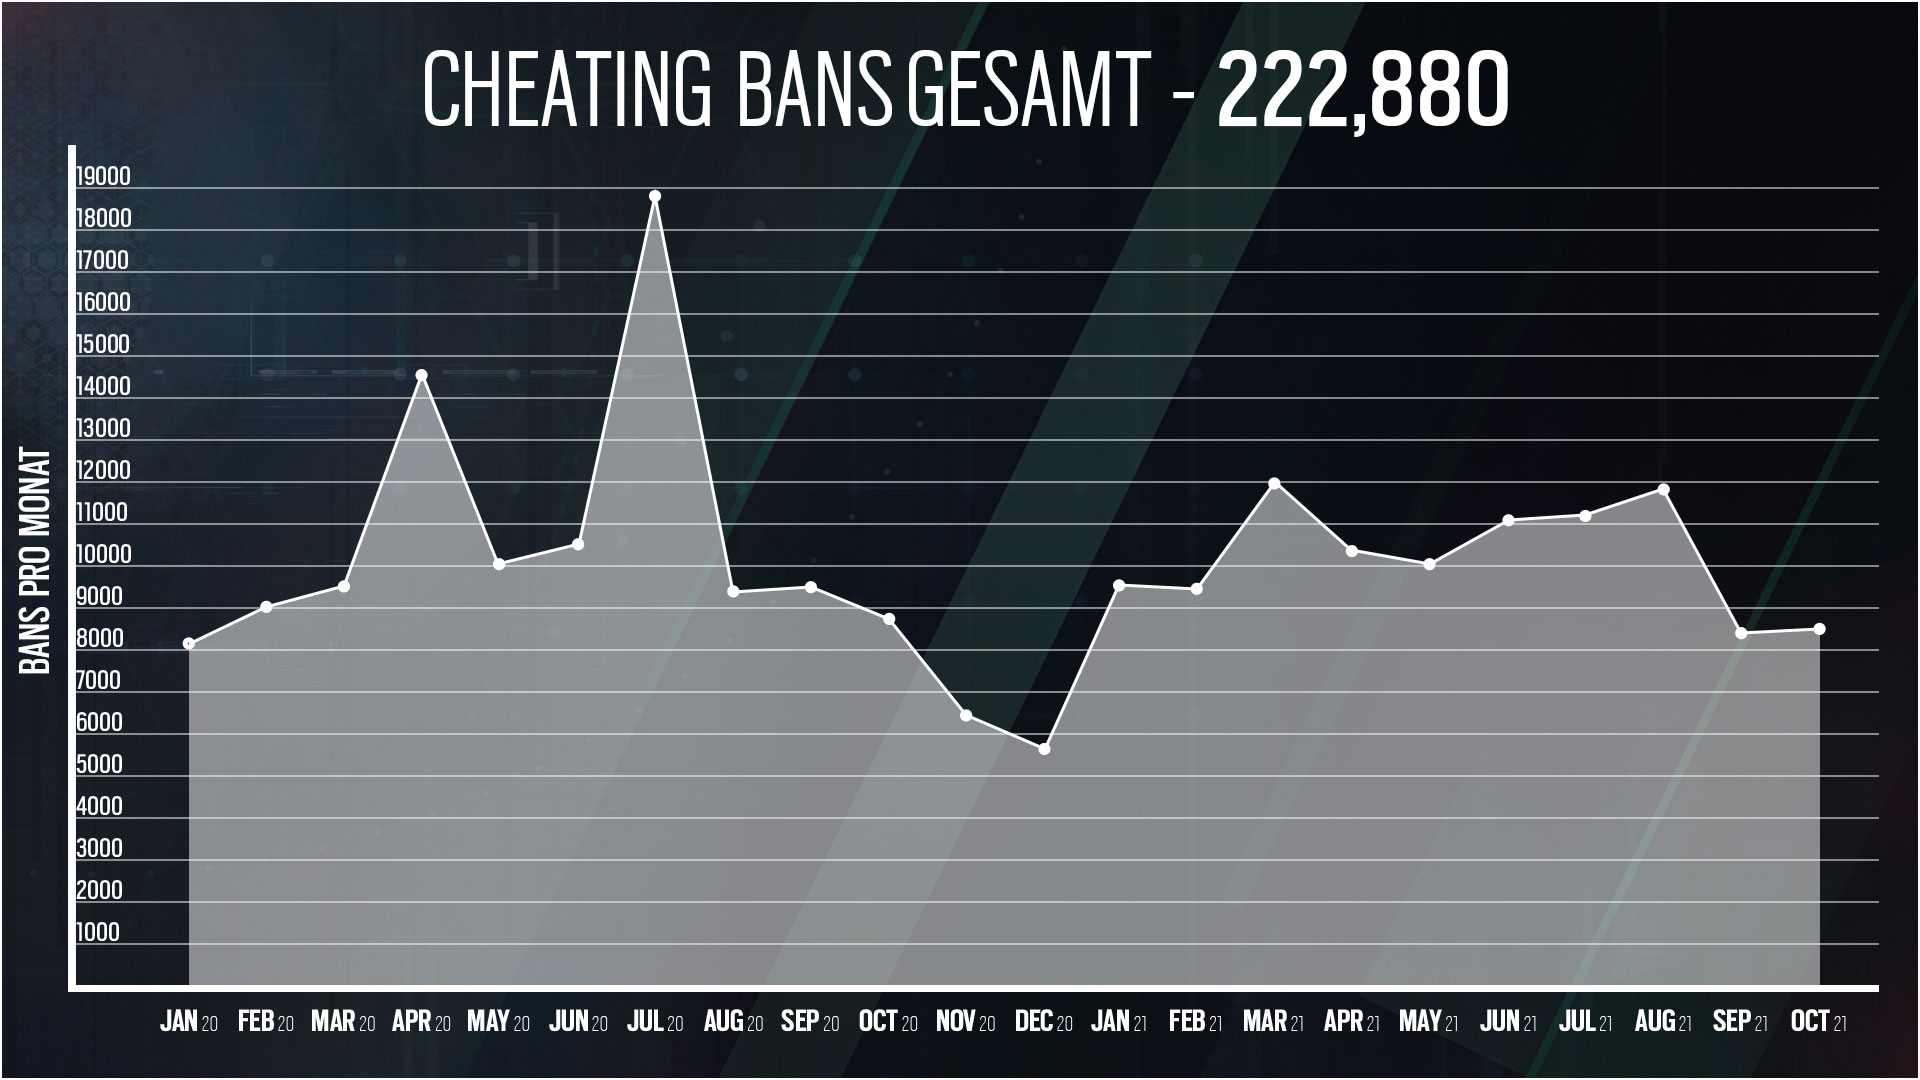 R6S TOTAL-CHEATING-BANS - German 2